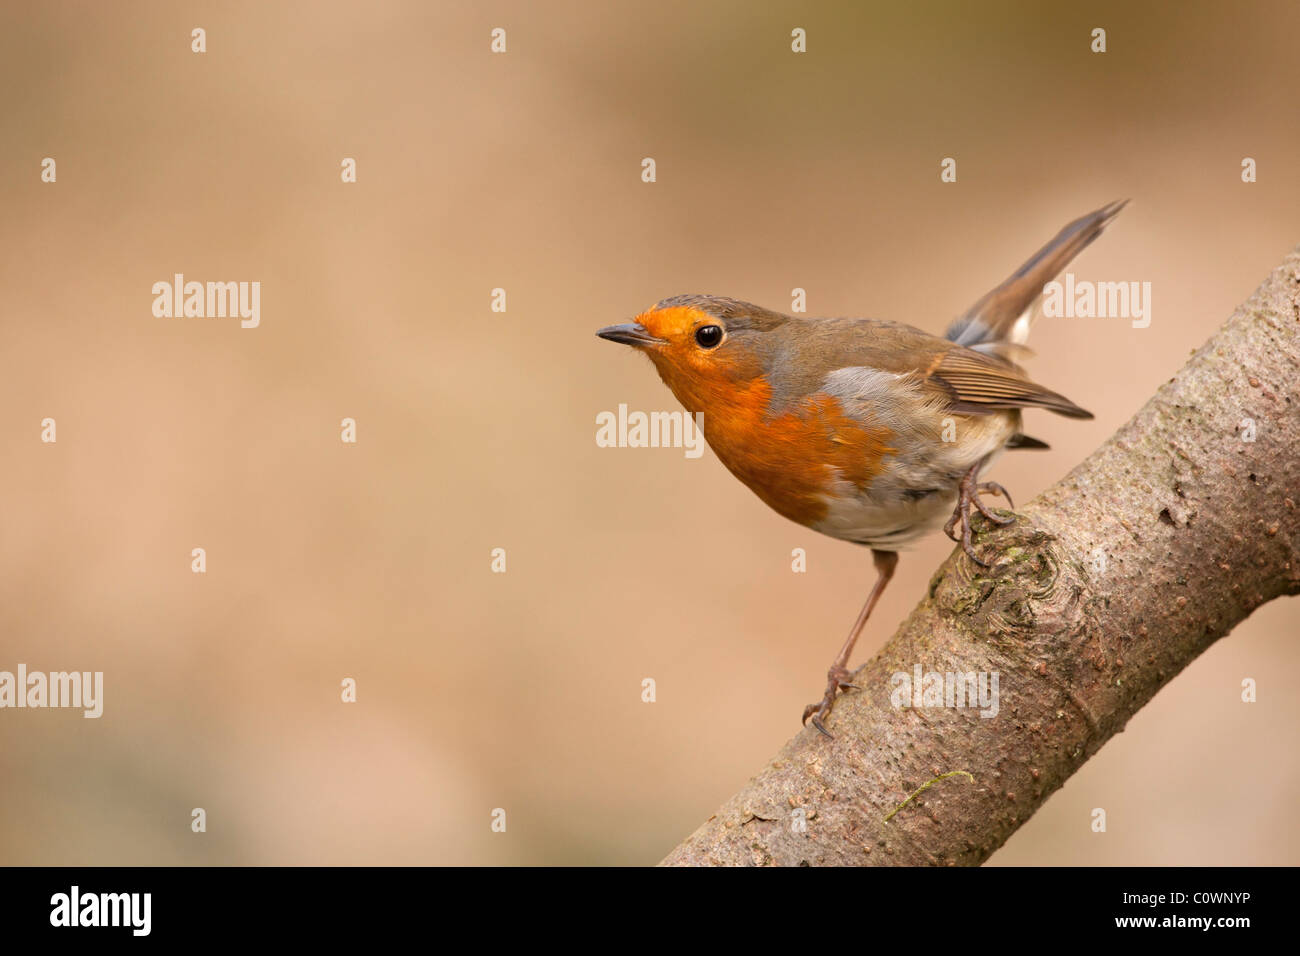 European Robin (Erithacus rubecula) adult perched on branch, UK. Stock Photo